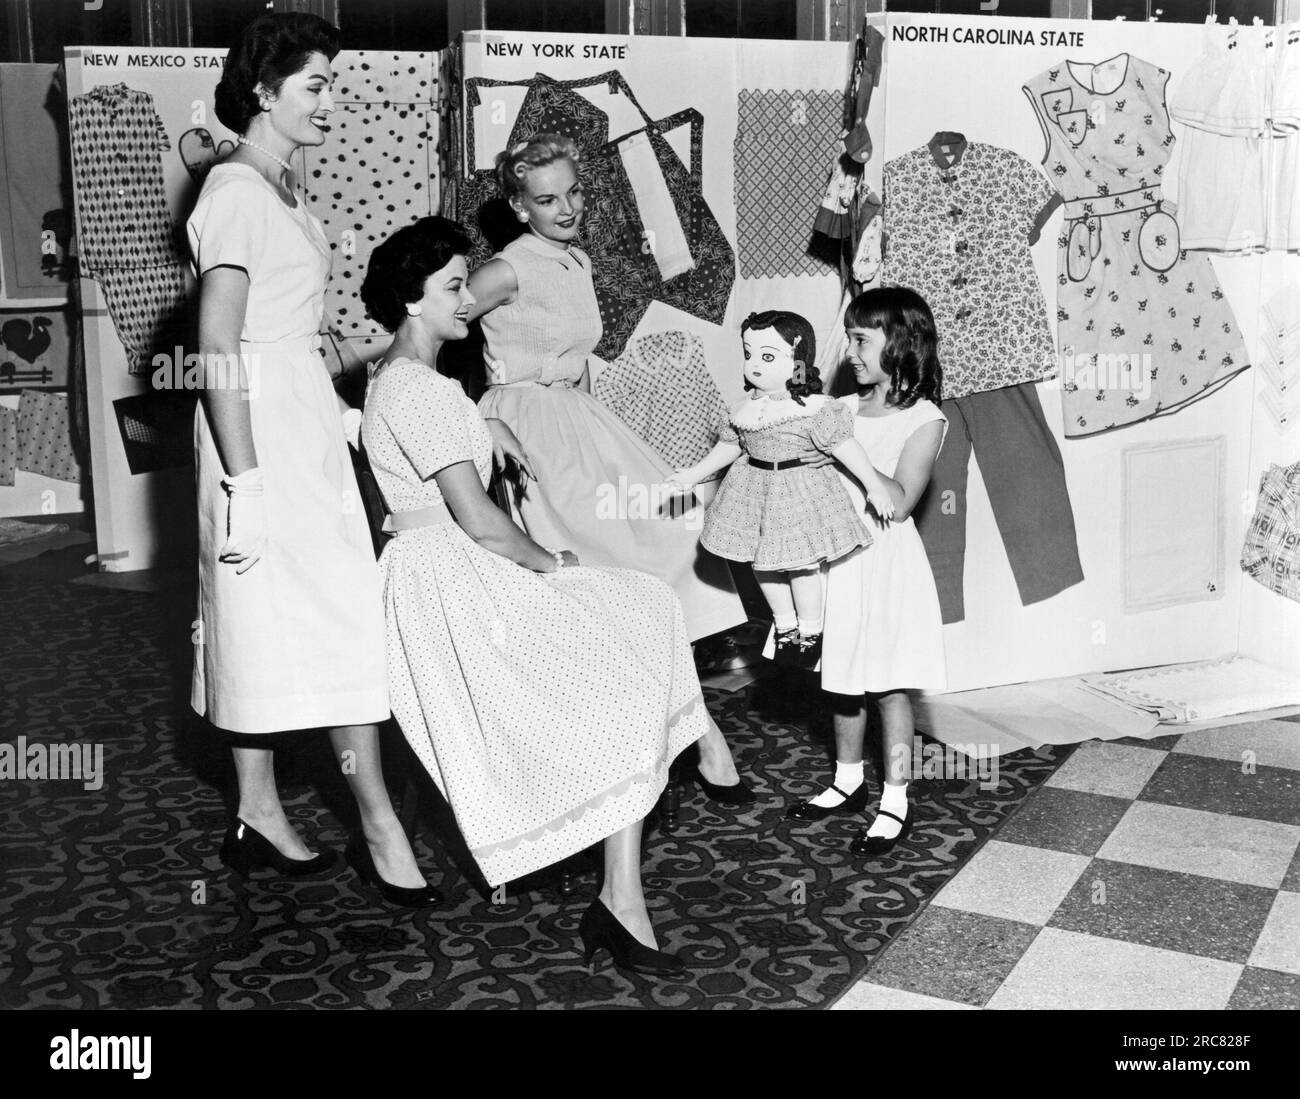 United States:  c. 1957 Dresses and other articles of clothing in this photograph were made by winners in the National Cotton Bag Sewing Contest, a competition for women who sew with the cotton sacks used in packaging products. A young girl proudly holds her Raggedy Ann doll with cotton sack clothing. Stock Photo